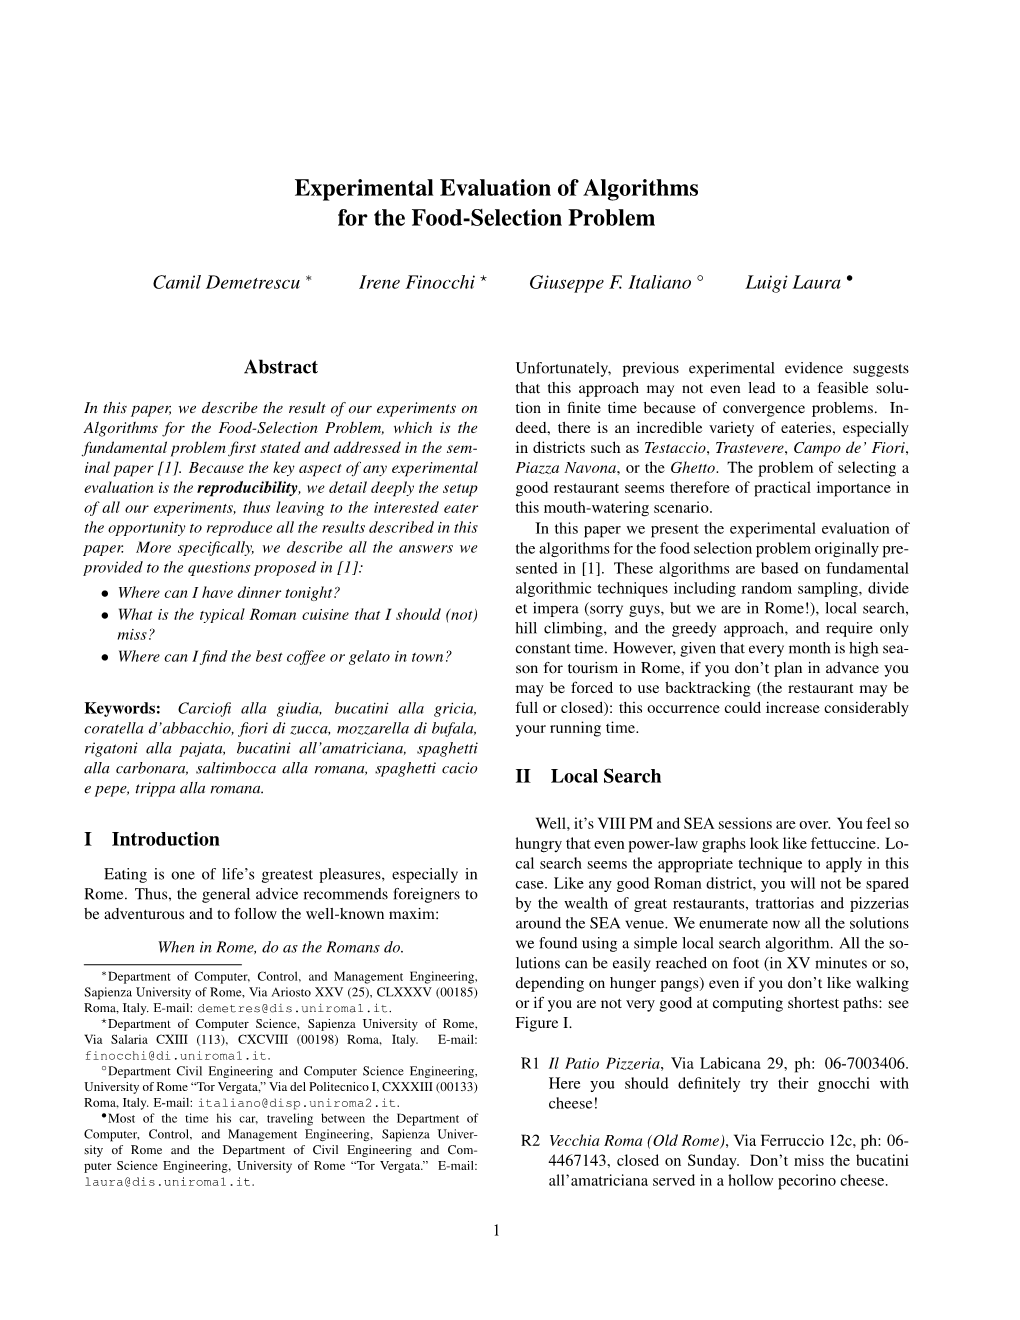 Experimental Evaluation of Algorithms for the Food-Selection Problem